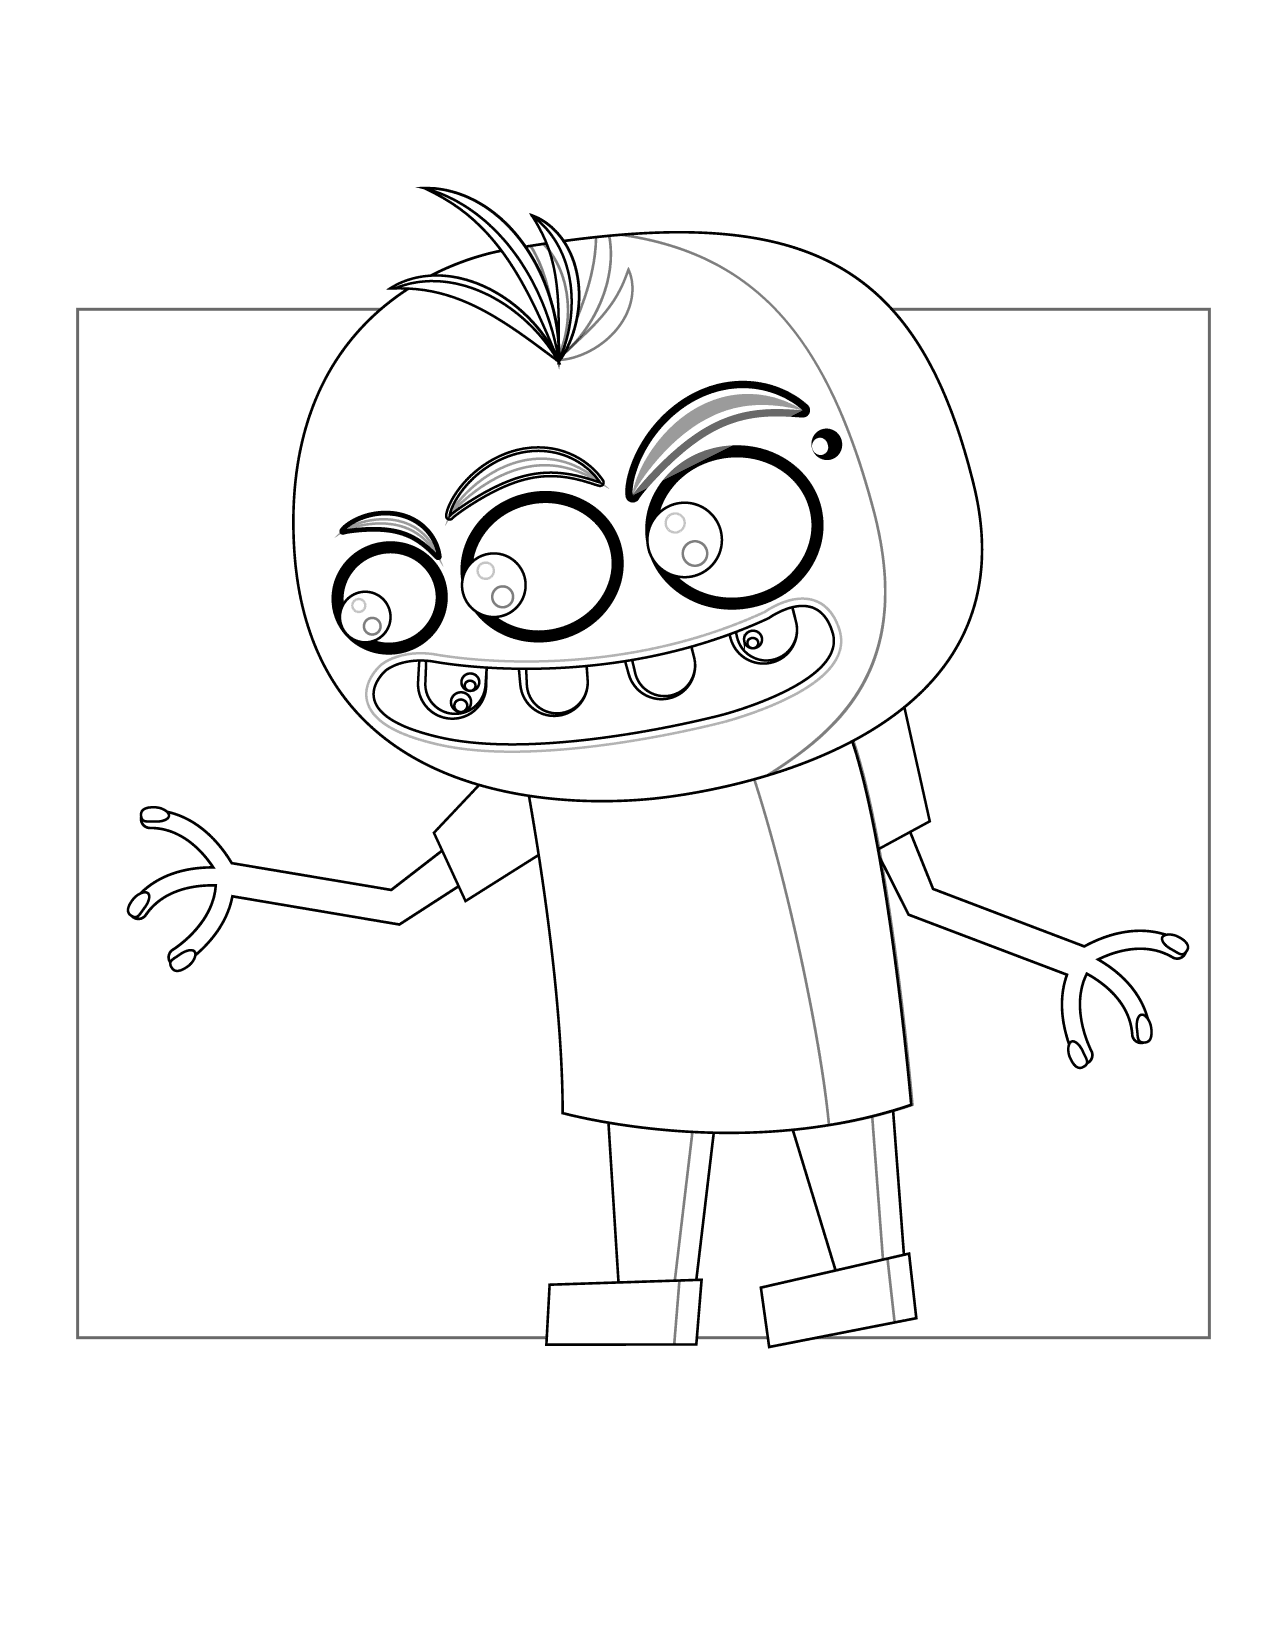 Tree Eyed Monster Coloring Page